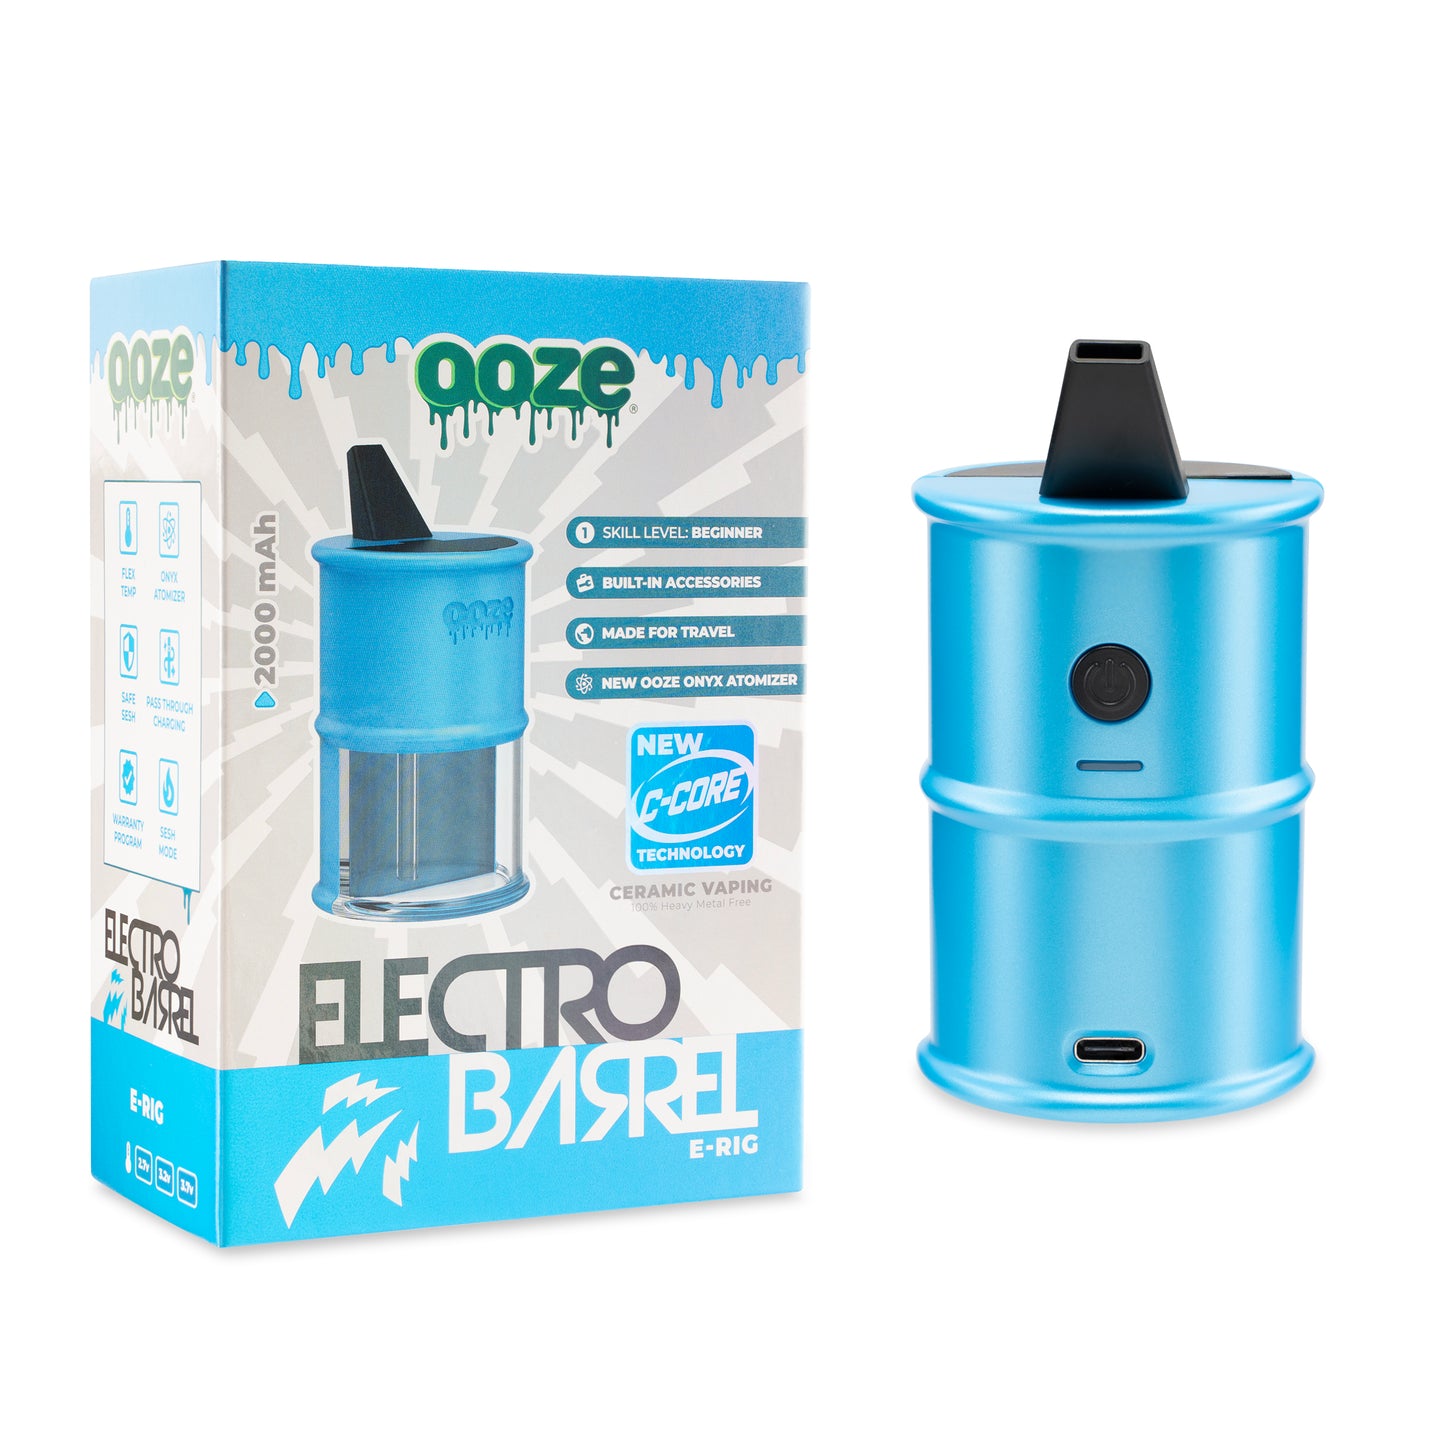 The Arctic Blue Ooze Electro Barrel E-Rig is shown standing next to the packaging.